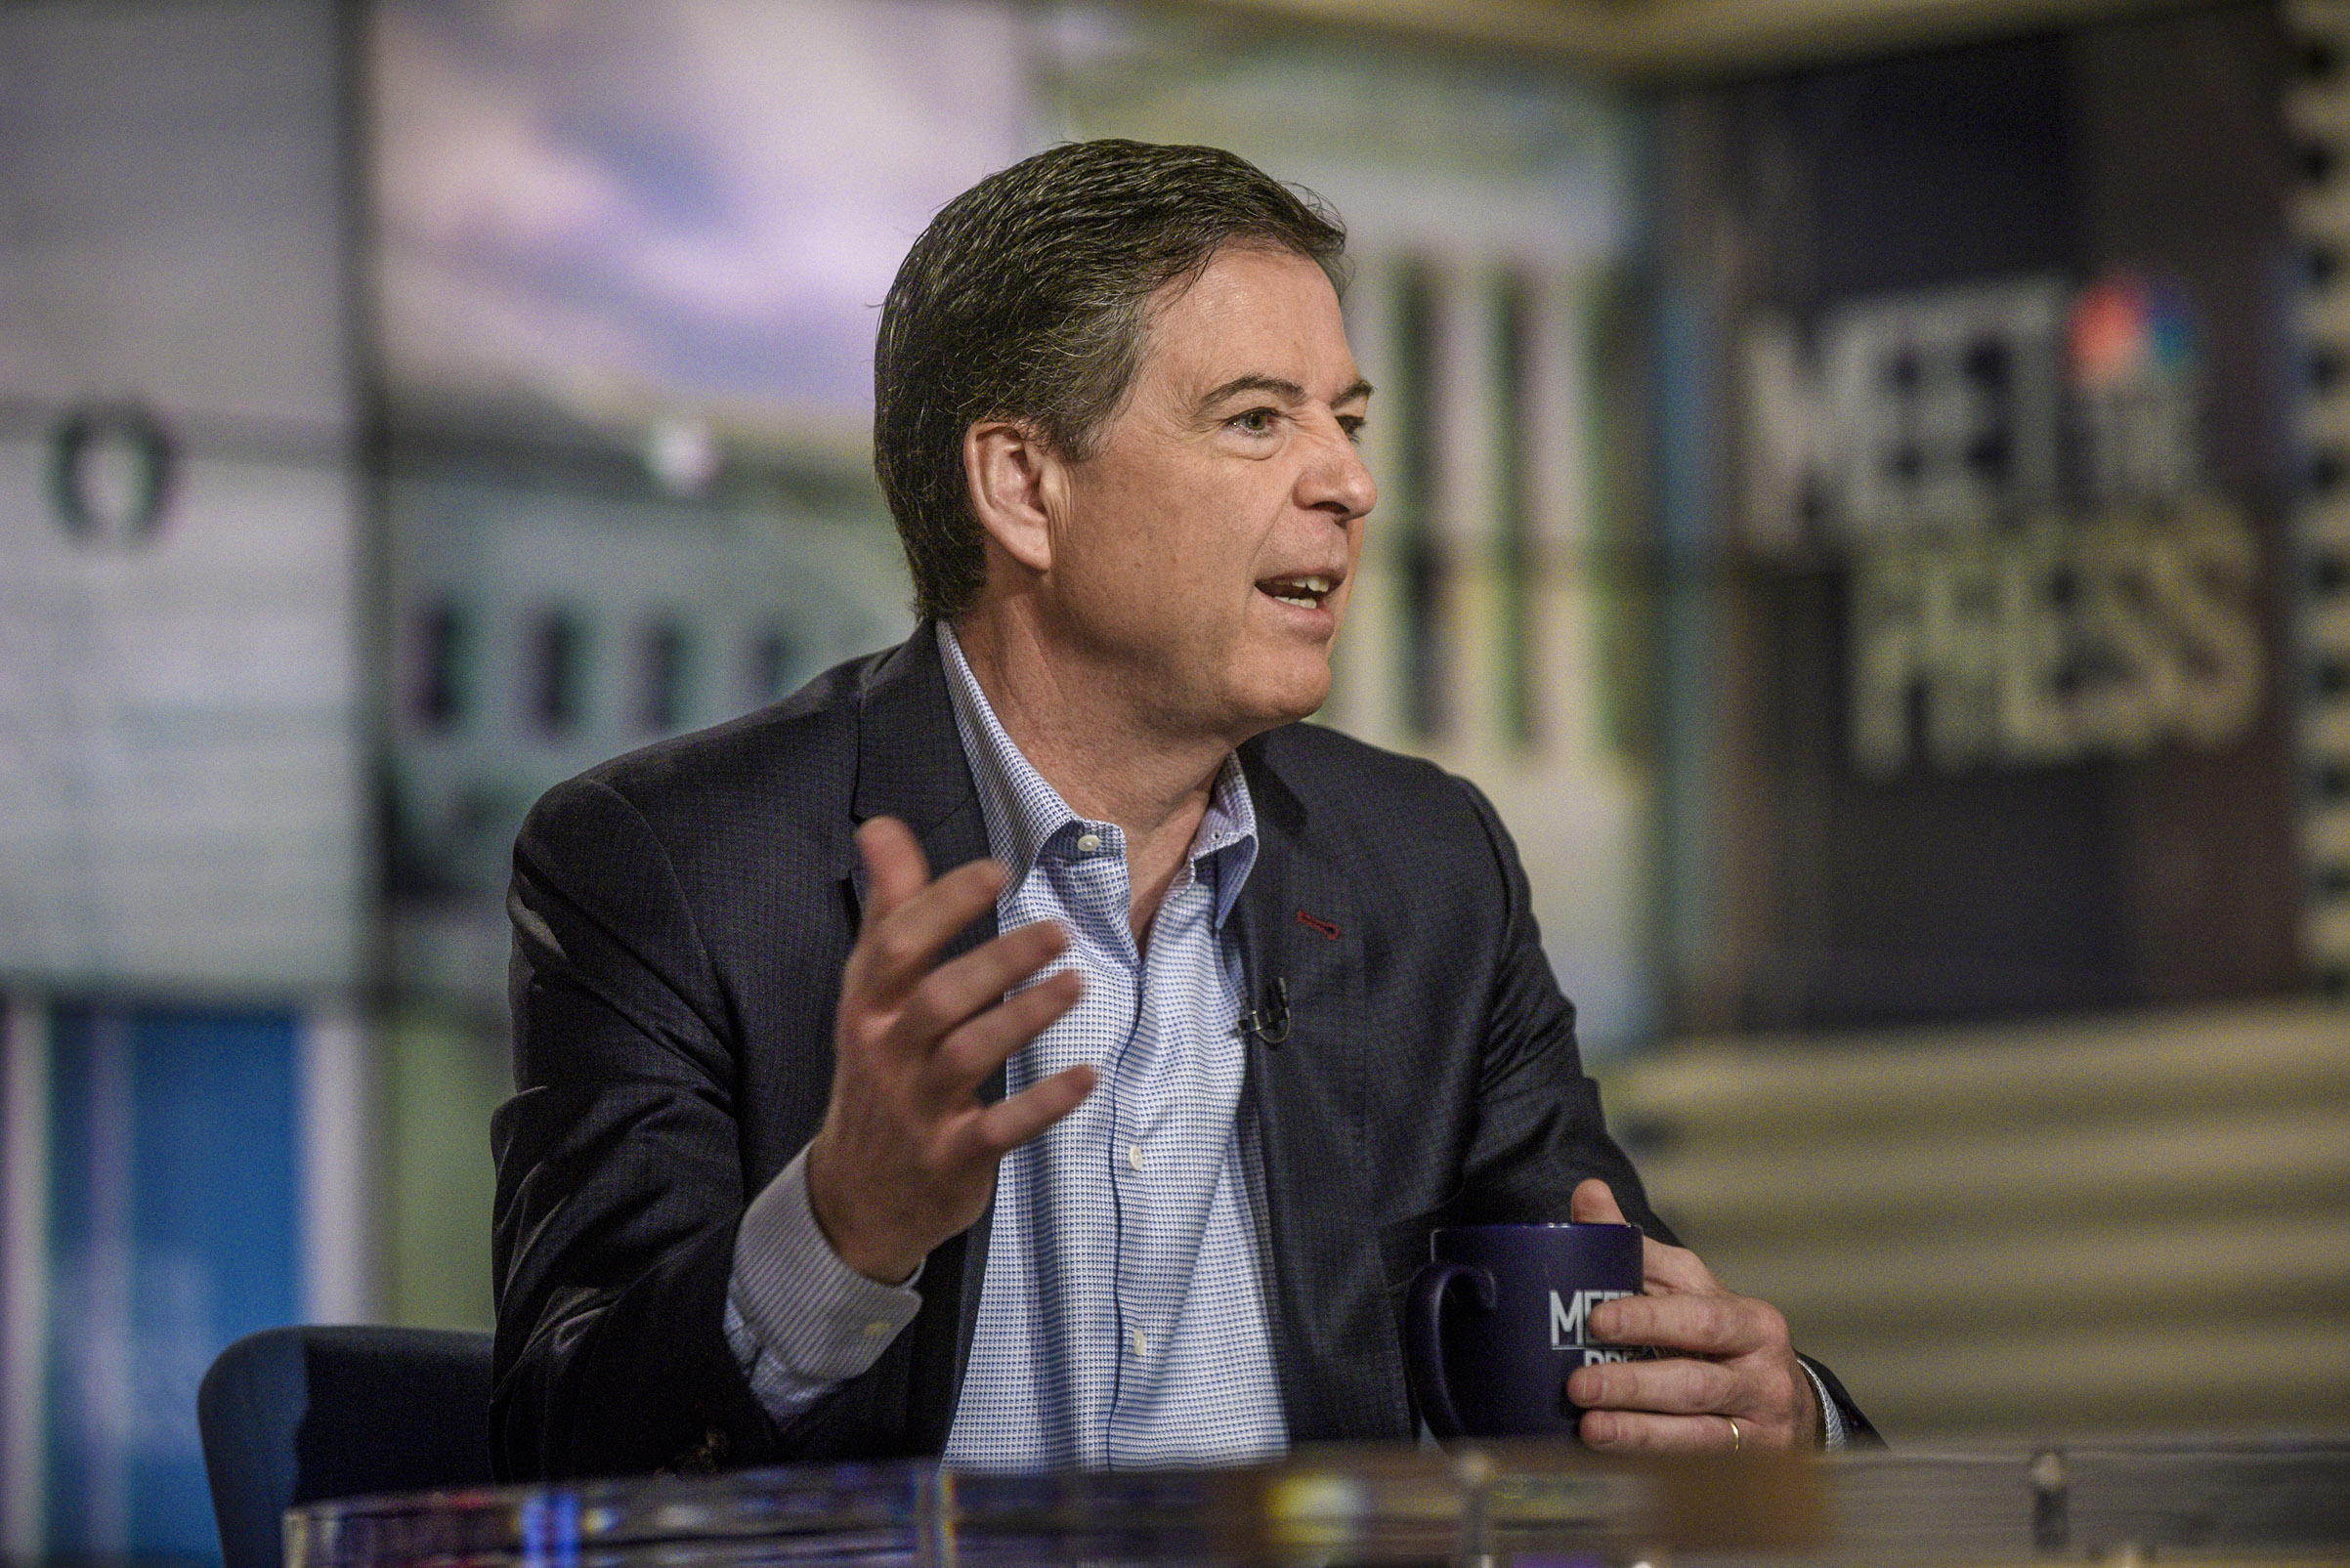 James Comey, Former FBI Director, appears on "Meet the Press" in Washington, D.C., Sunday, April 29, 2018 (William B. Plowman—NBC/Getty Images)